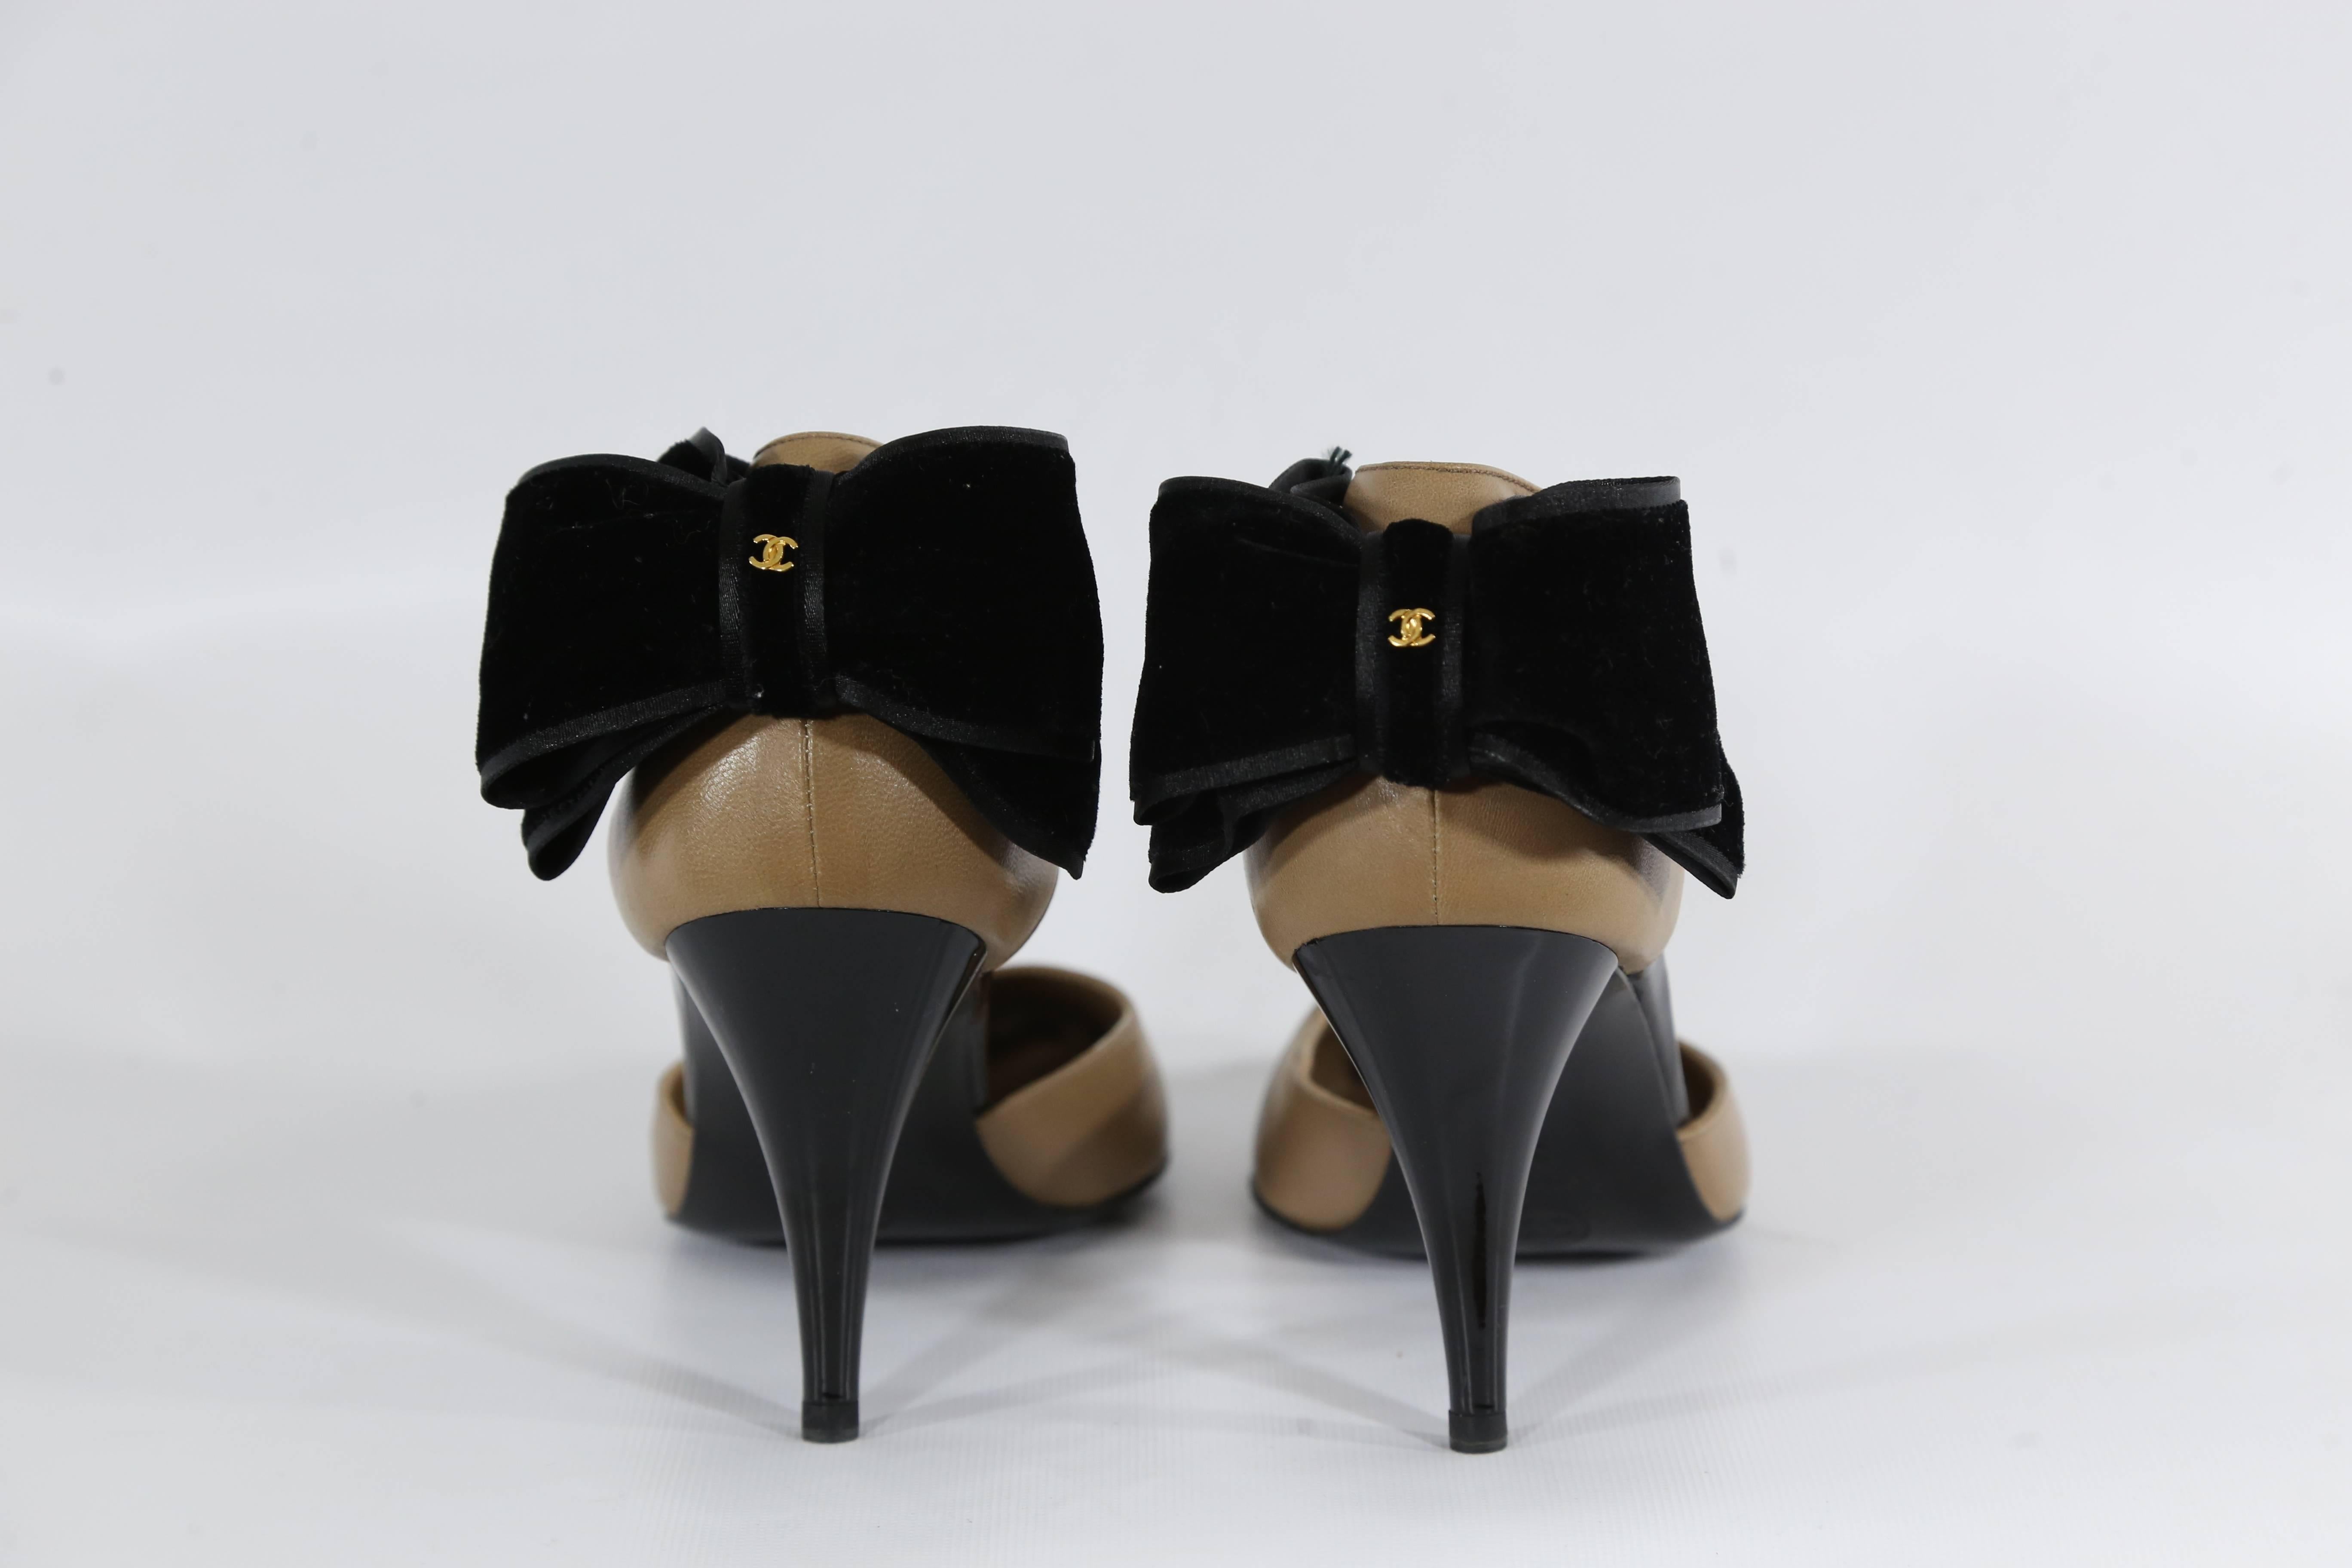 Chanel beige leather pumps with black heel and Velvet black bows. 